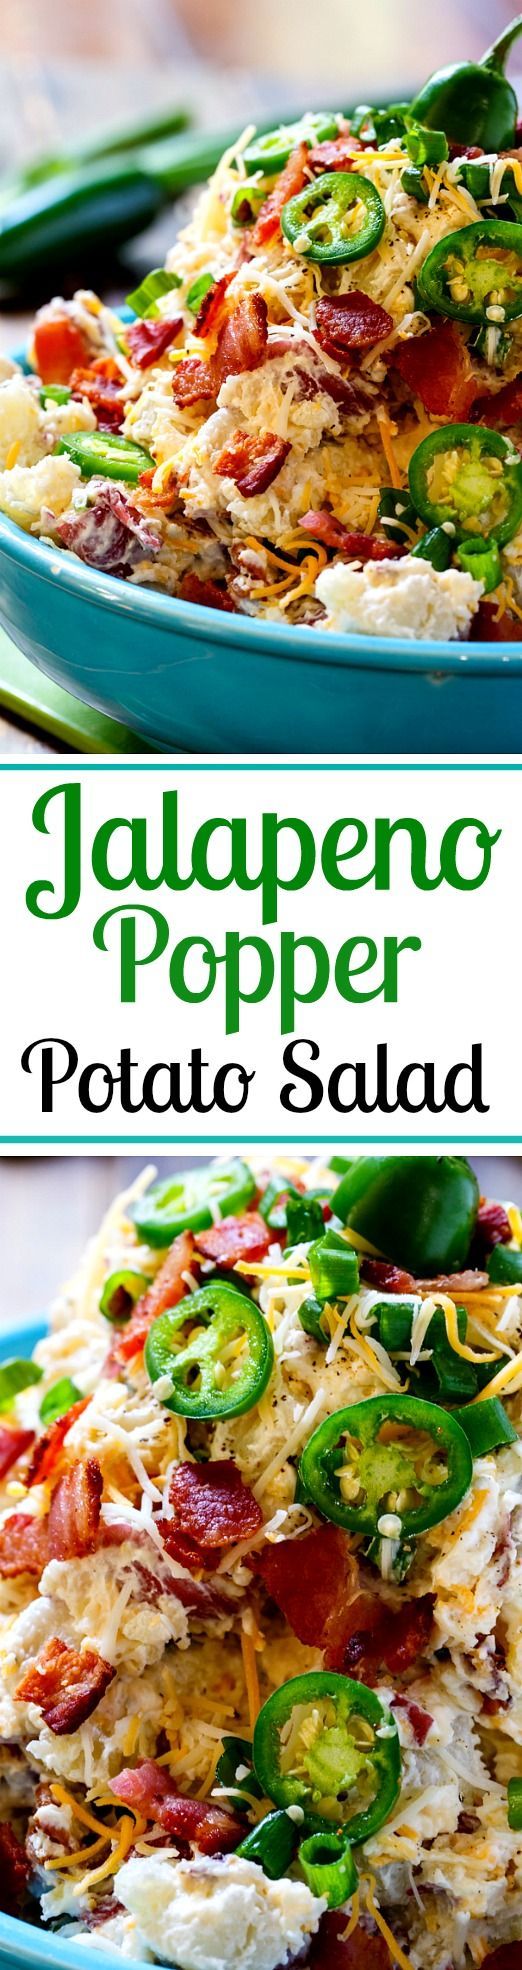 Jalapeno Popper Potato Salad made with cream cheese, bacon, and lots of jalapeno peppers. Great way to spice up your cookout!